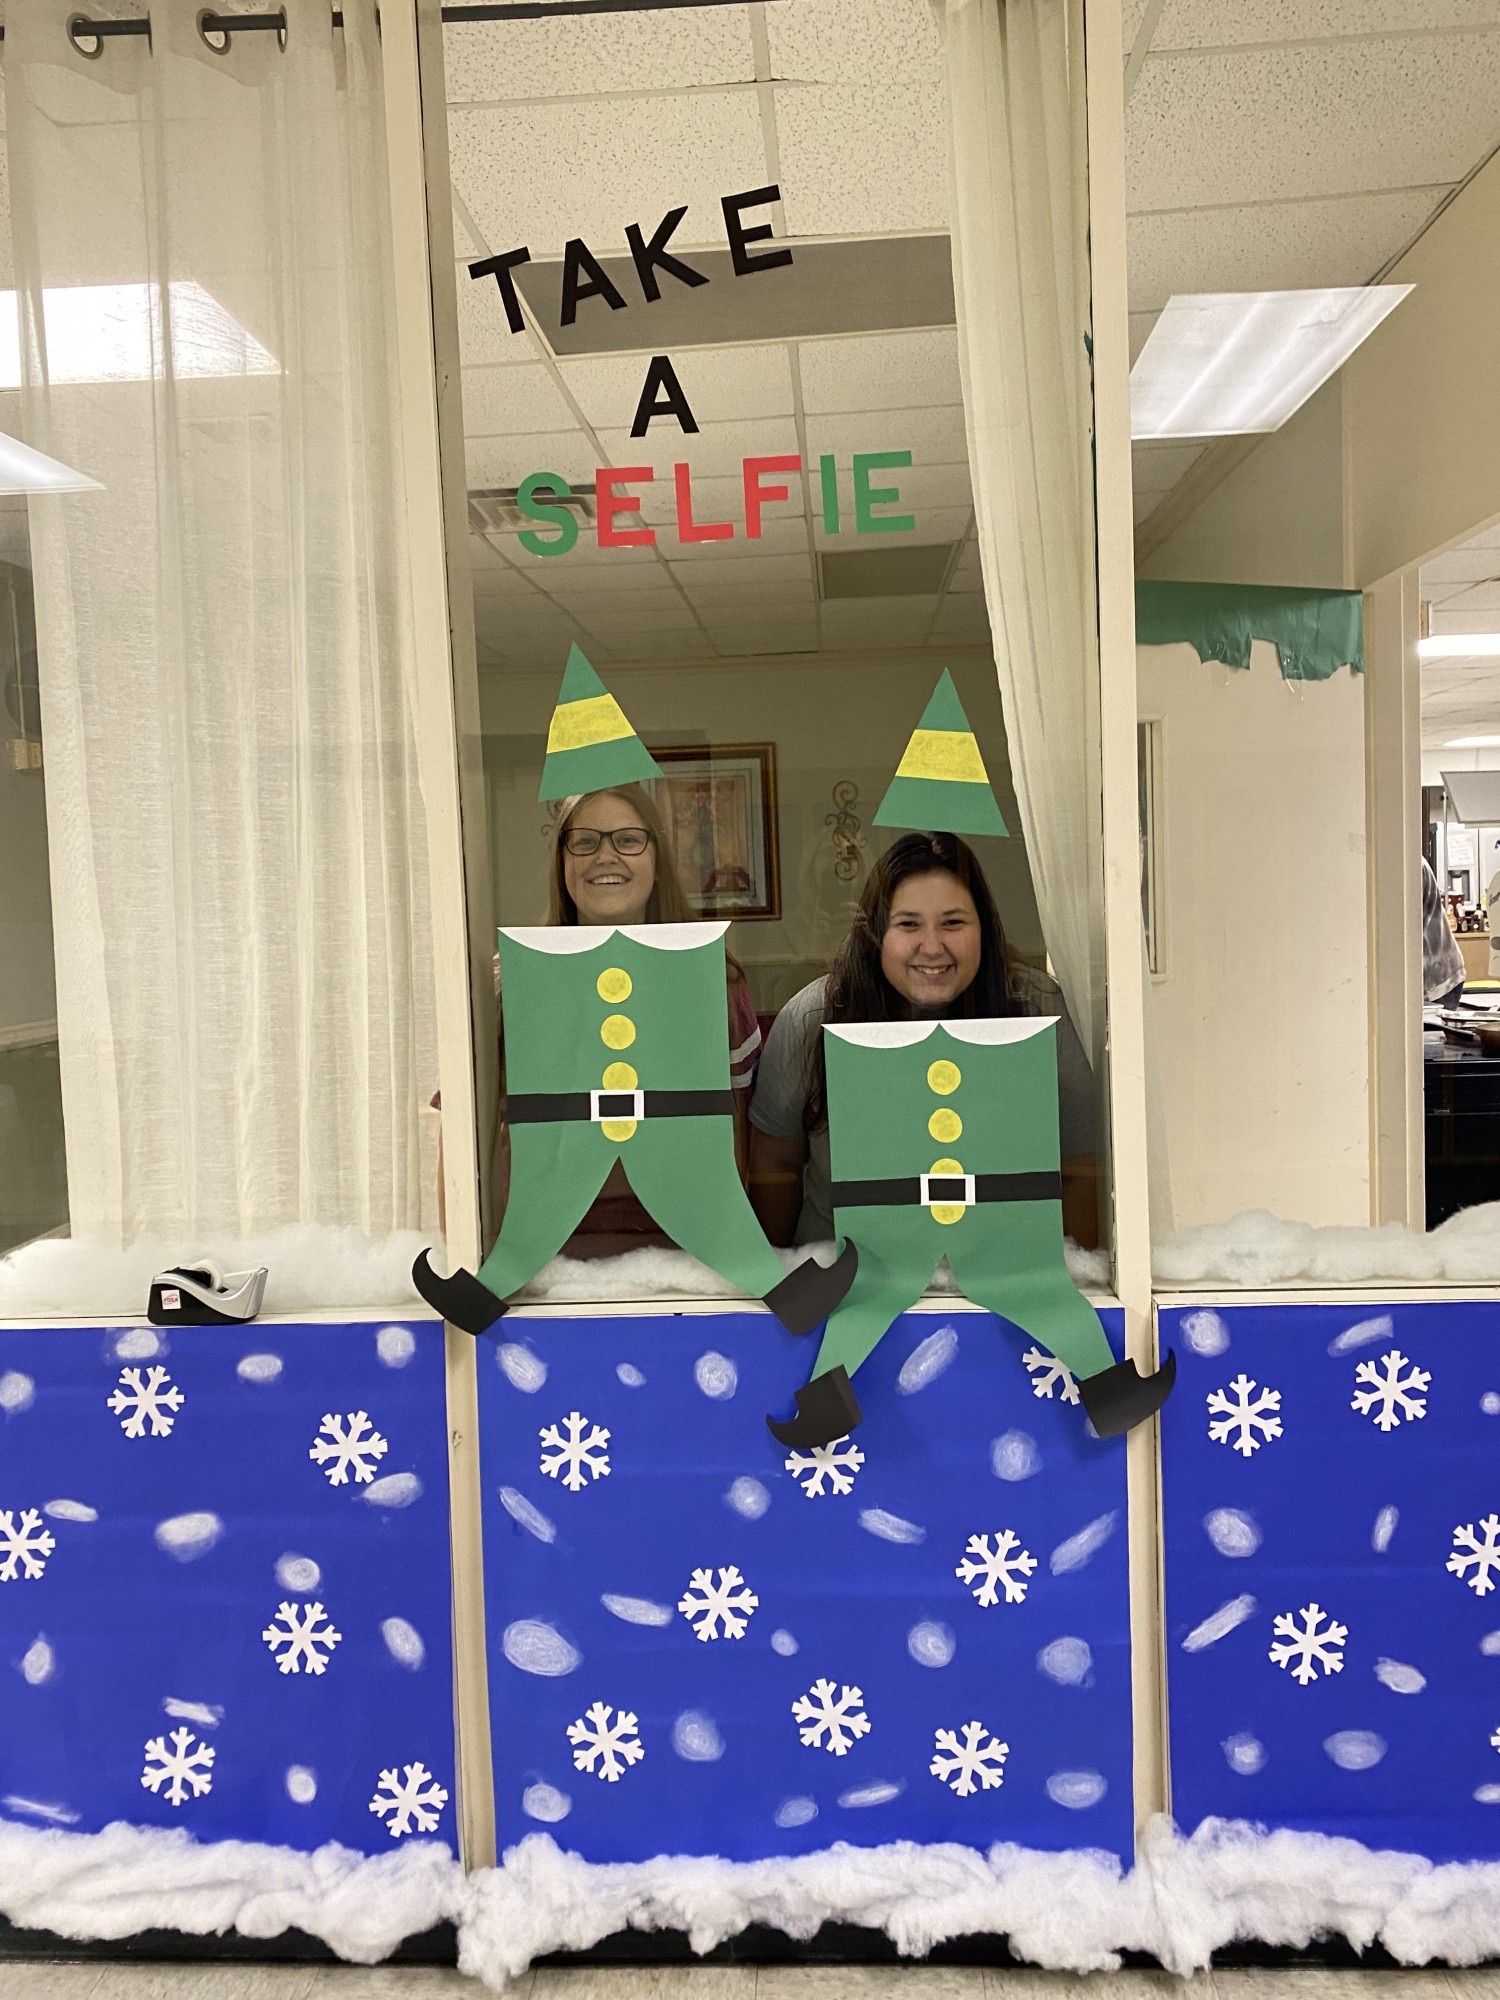 ECHS FCCLA Spreading Christmas Cheer with Selfies